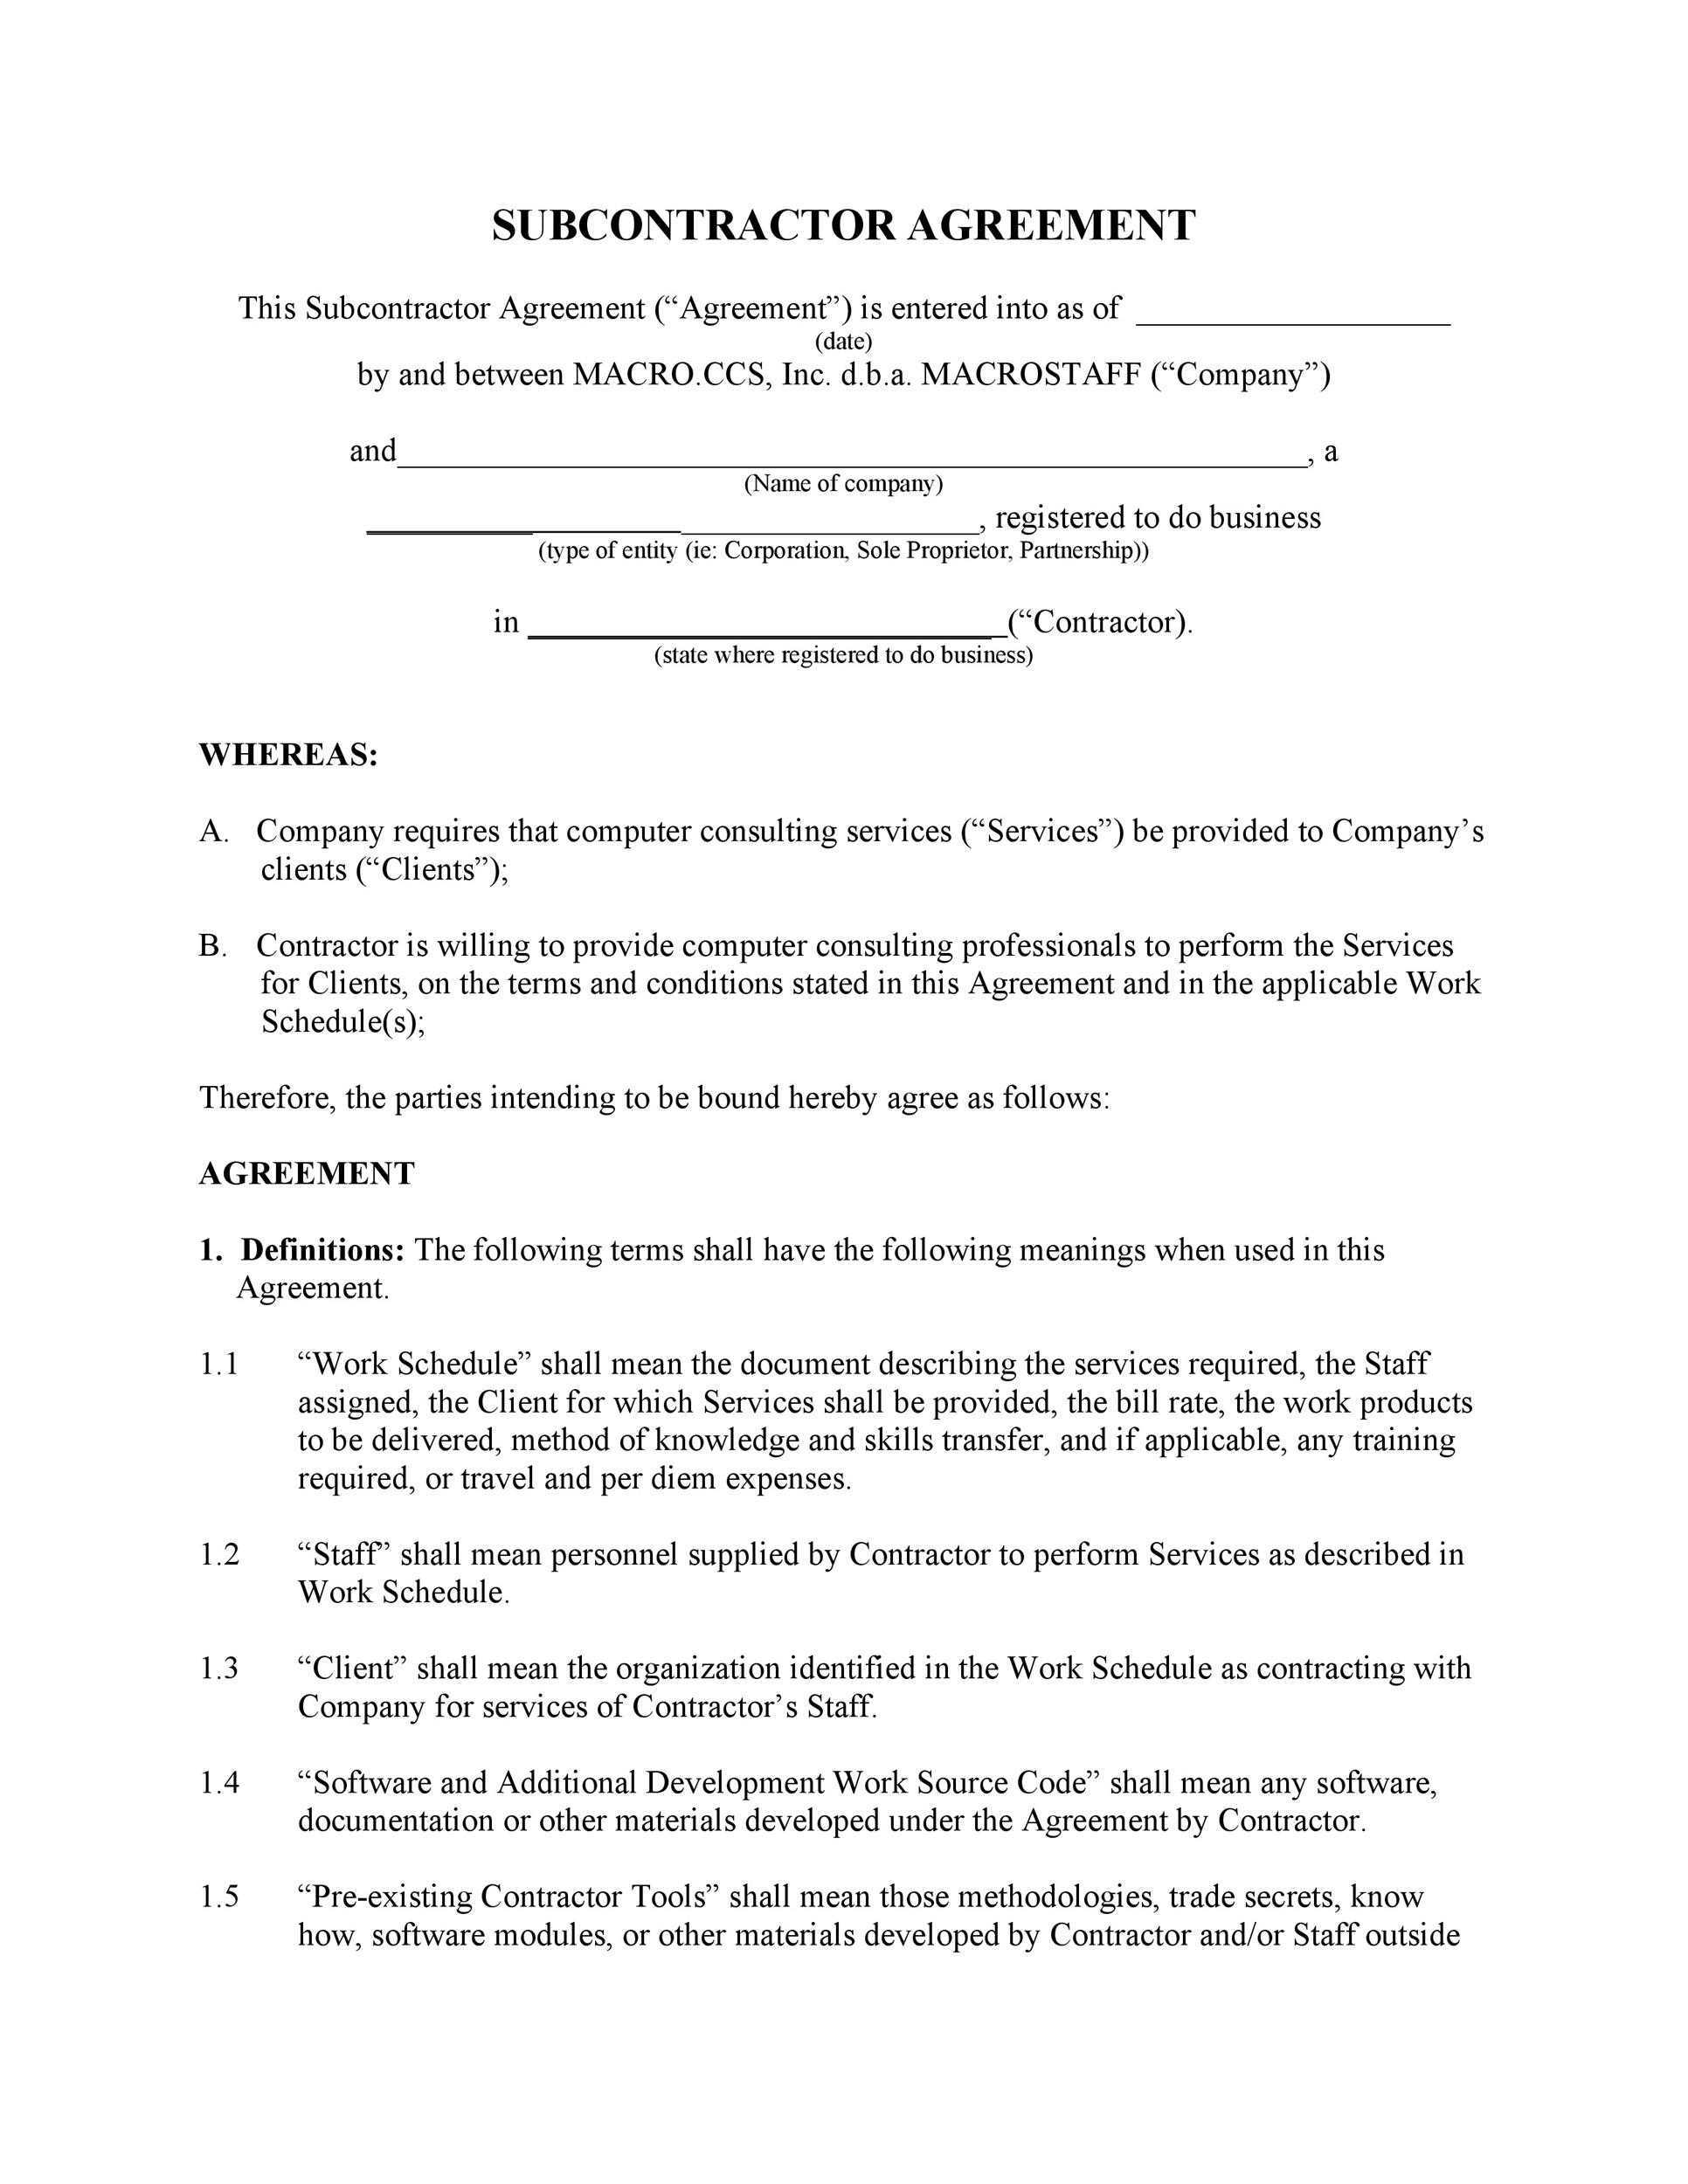 Free Subcontractor Agreement 03